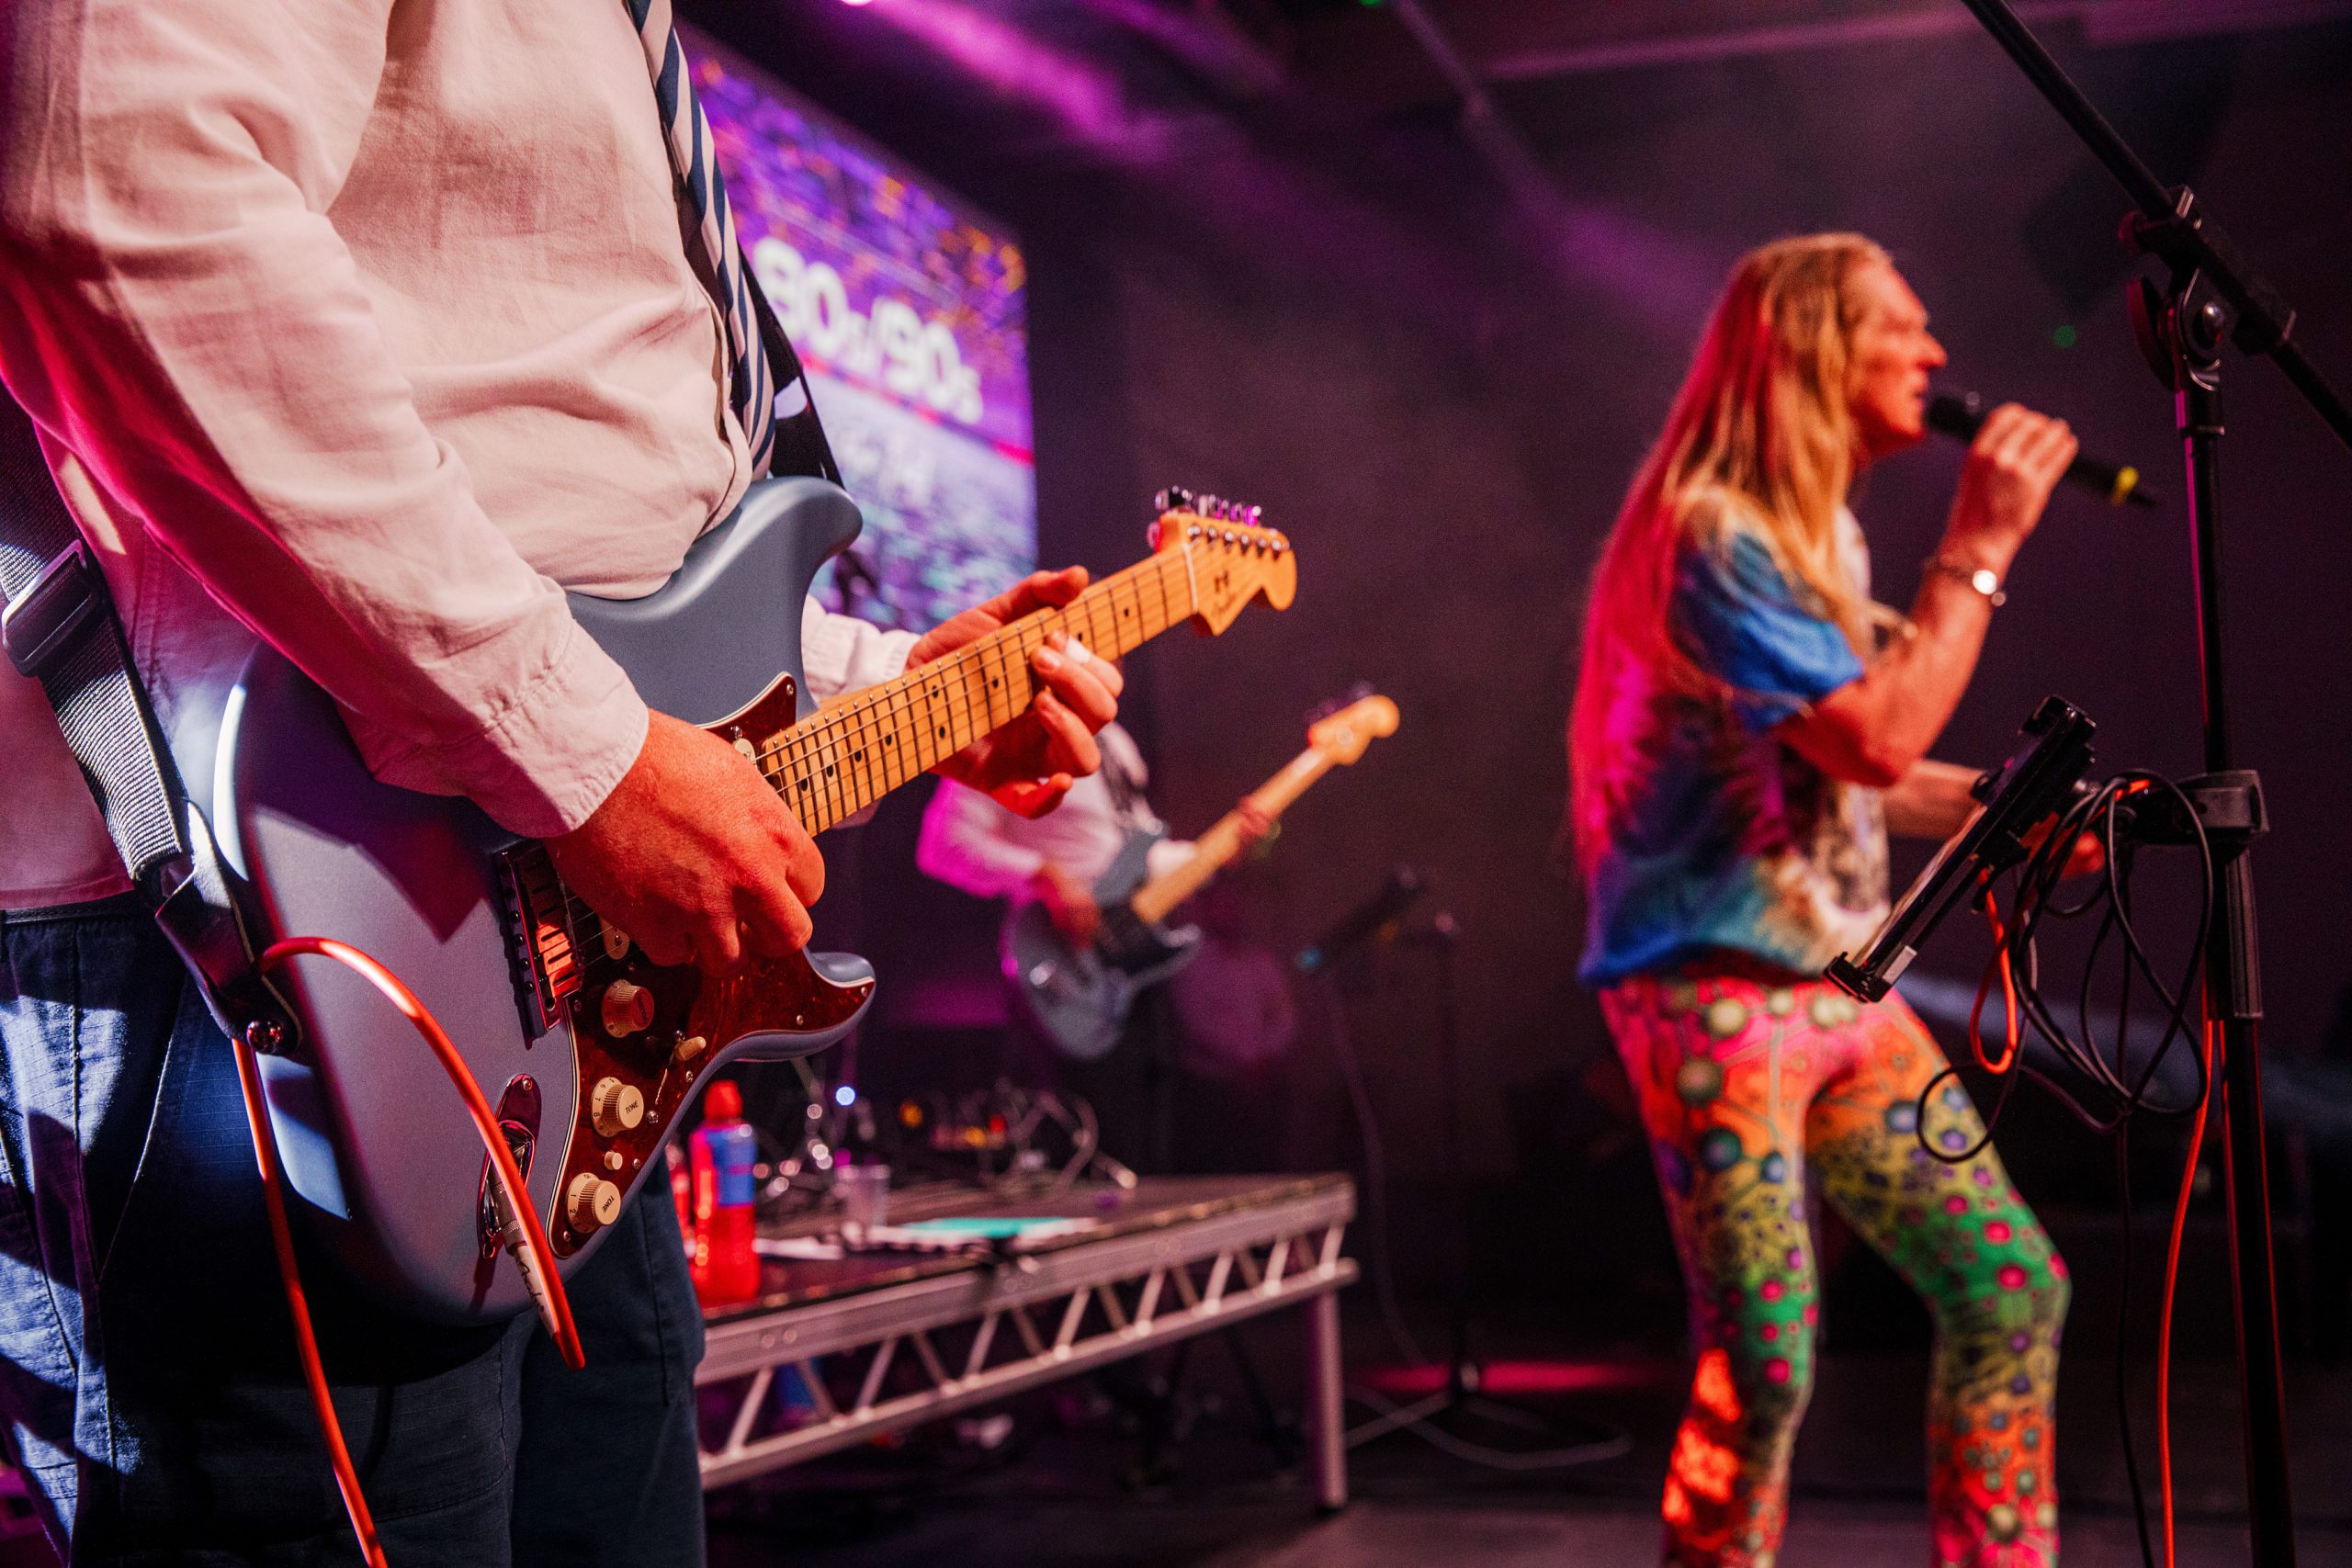 Take a look at some of our favourite moments from our 2023 Eastbourne 80s/90s Retro Music Fest night. Such amazing retro outfits and energy!